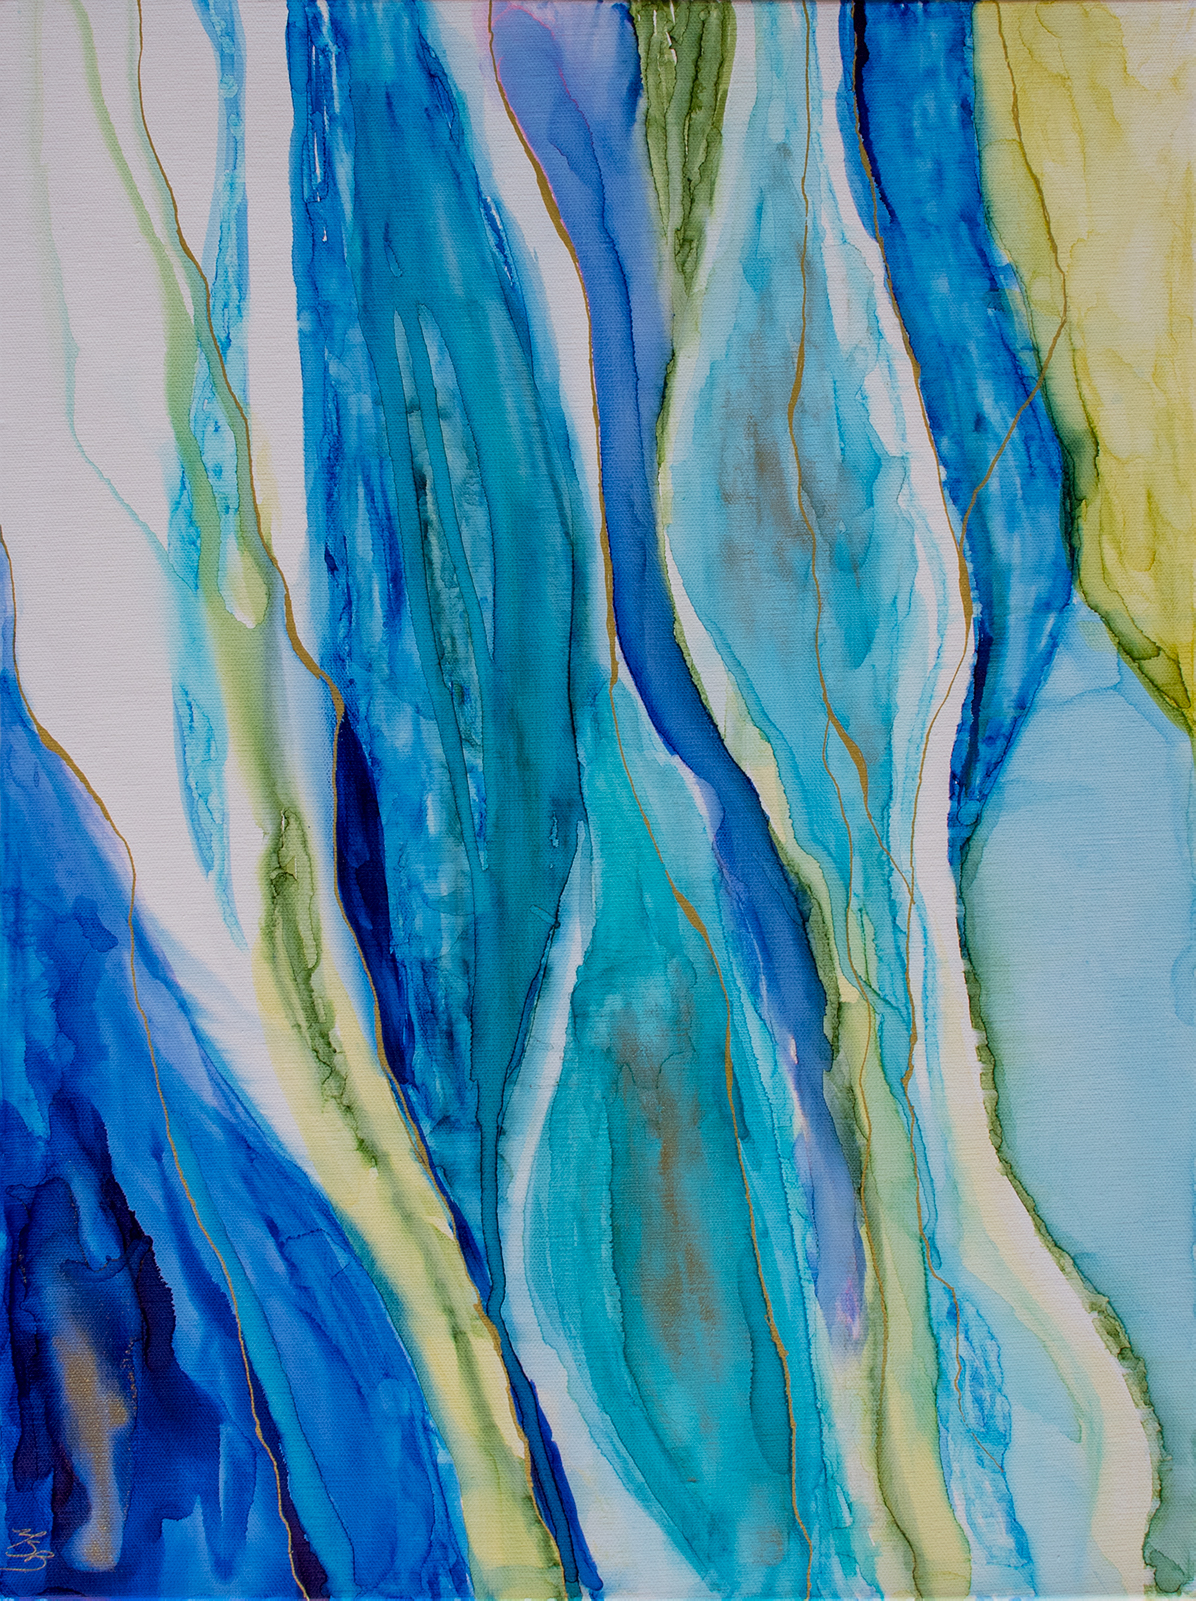 Abstract painting of teal, blue, and green with gold veins in alcohol ink on canvas by Mary Benke